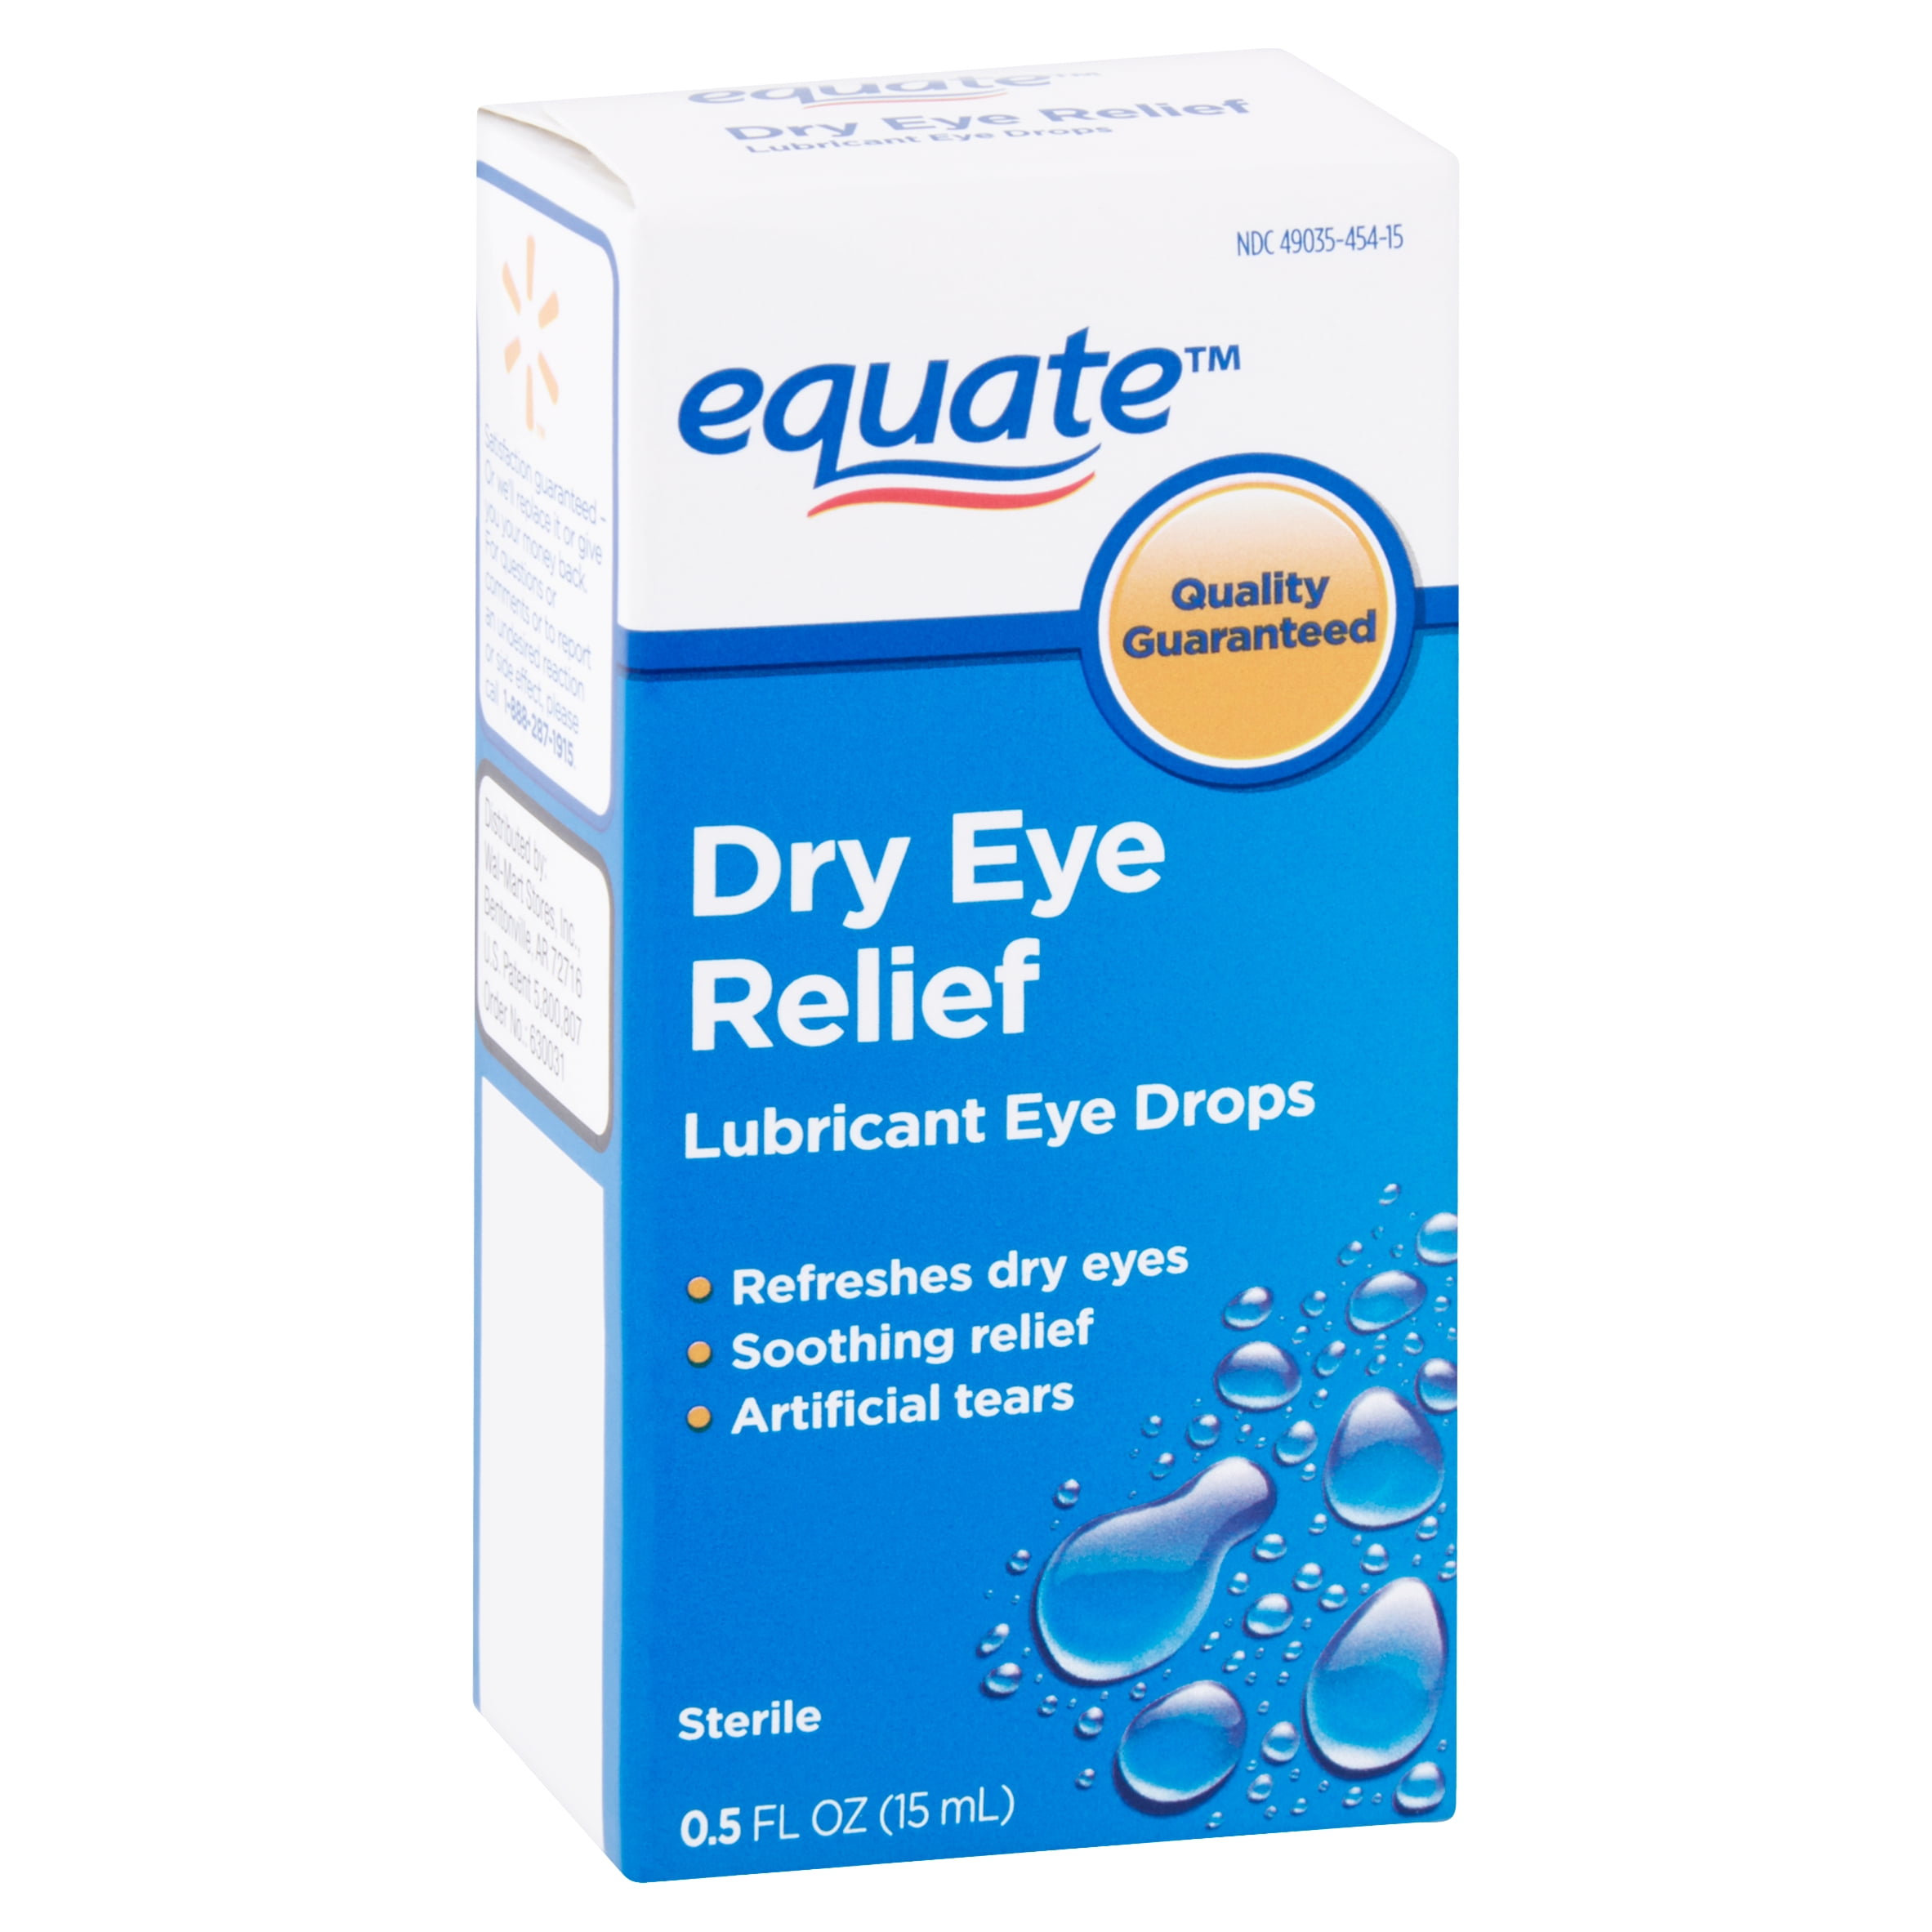 Equate Lubricant Eye Drops for Dry Eye Relief, 0.5 fl oz